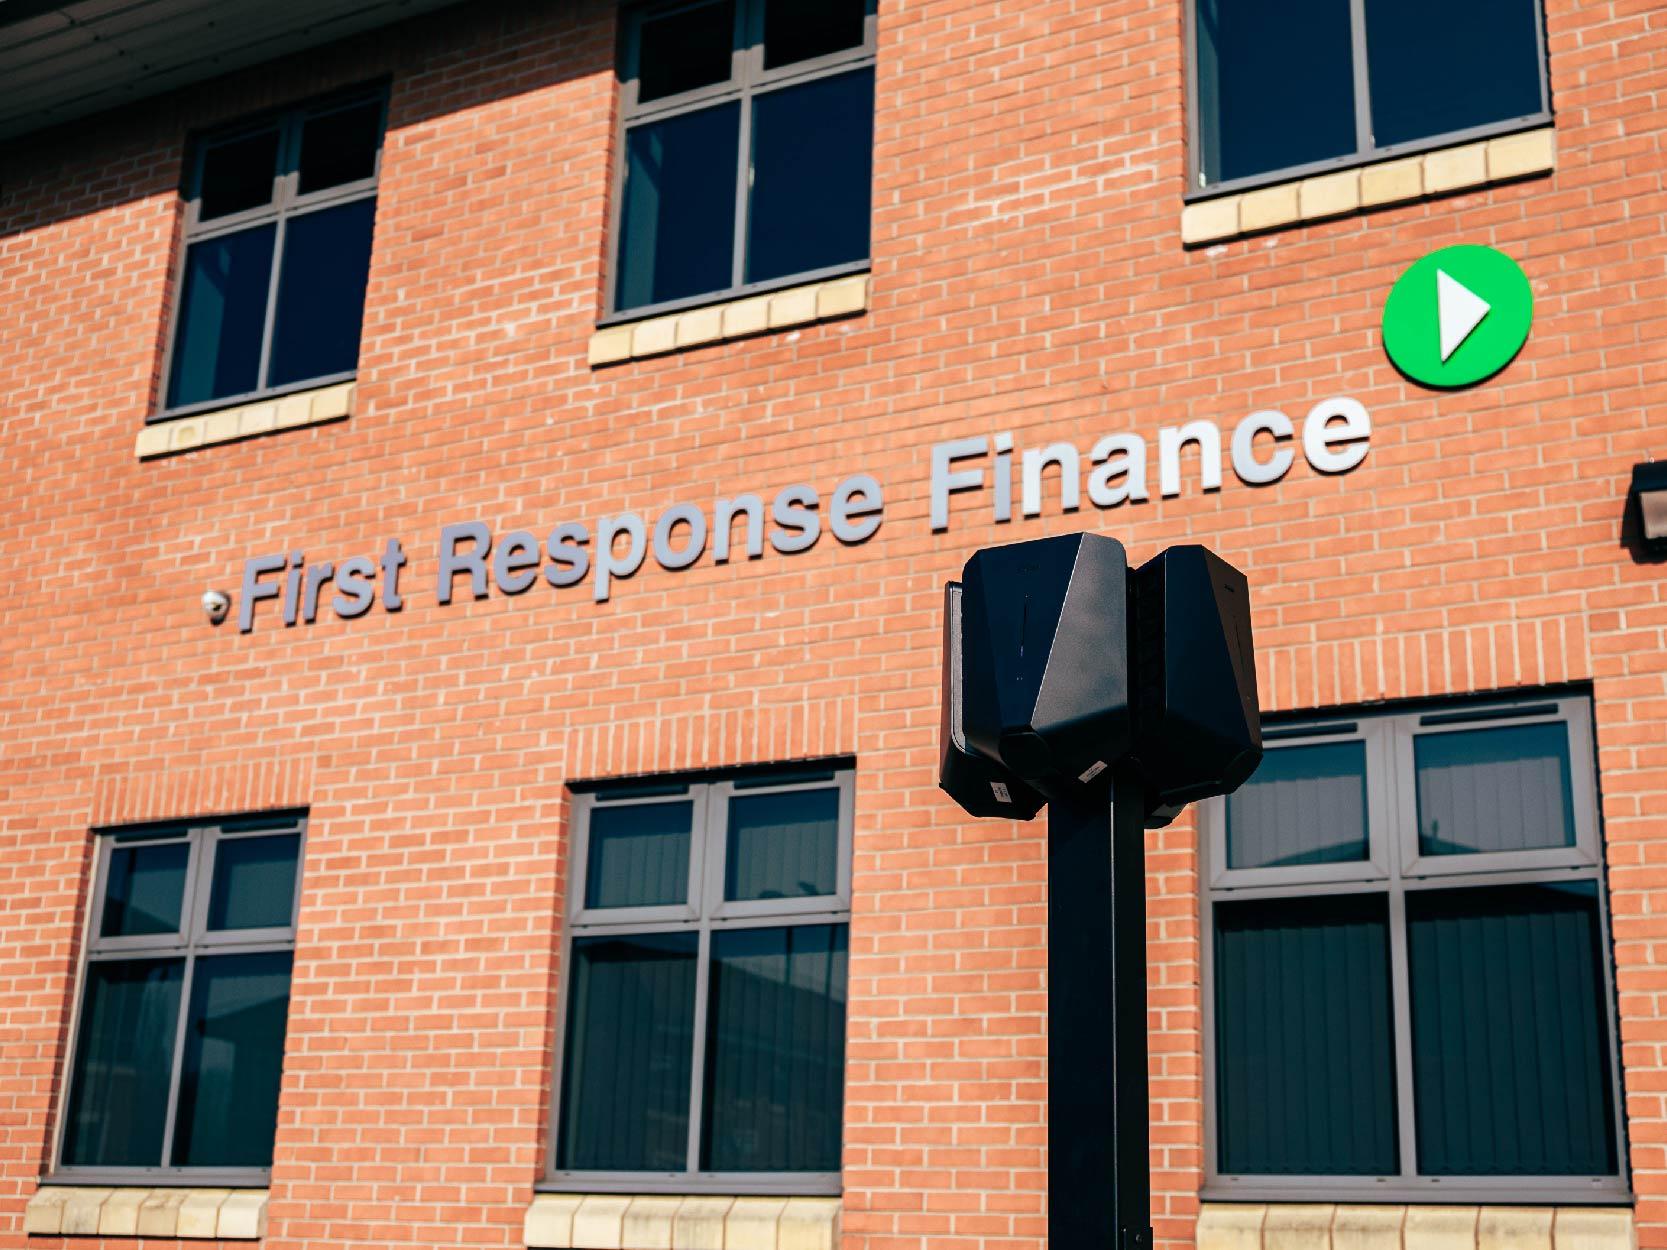 Why choose First Response Finance?